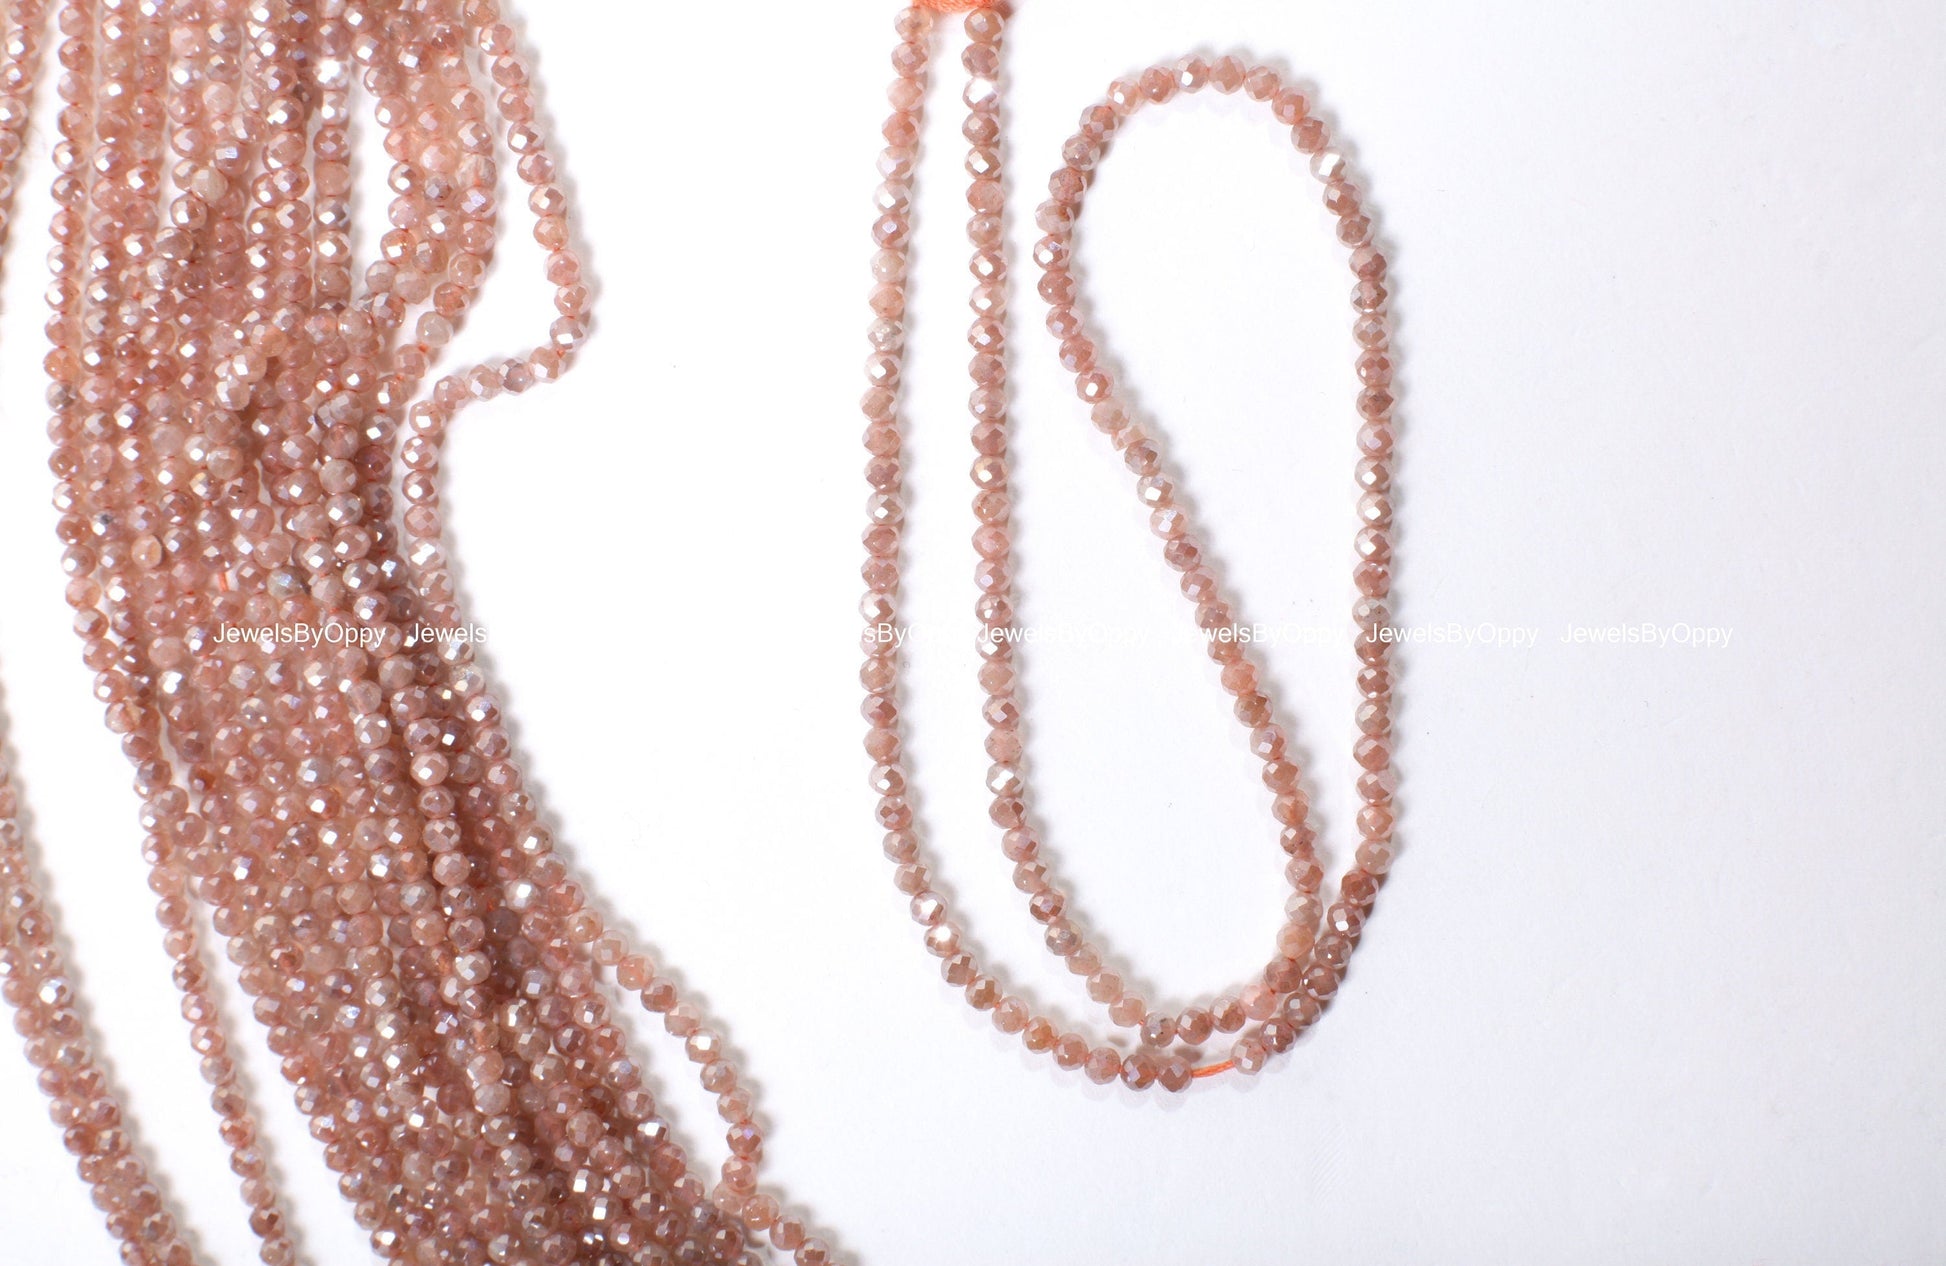 Natural Peach Mystic AAA Moonstone Faceted 2.2mm Round, Jewelry Making DIY Bracelet, Necklace Earrings 12.5&quot; Gemstone Beads